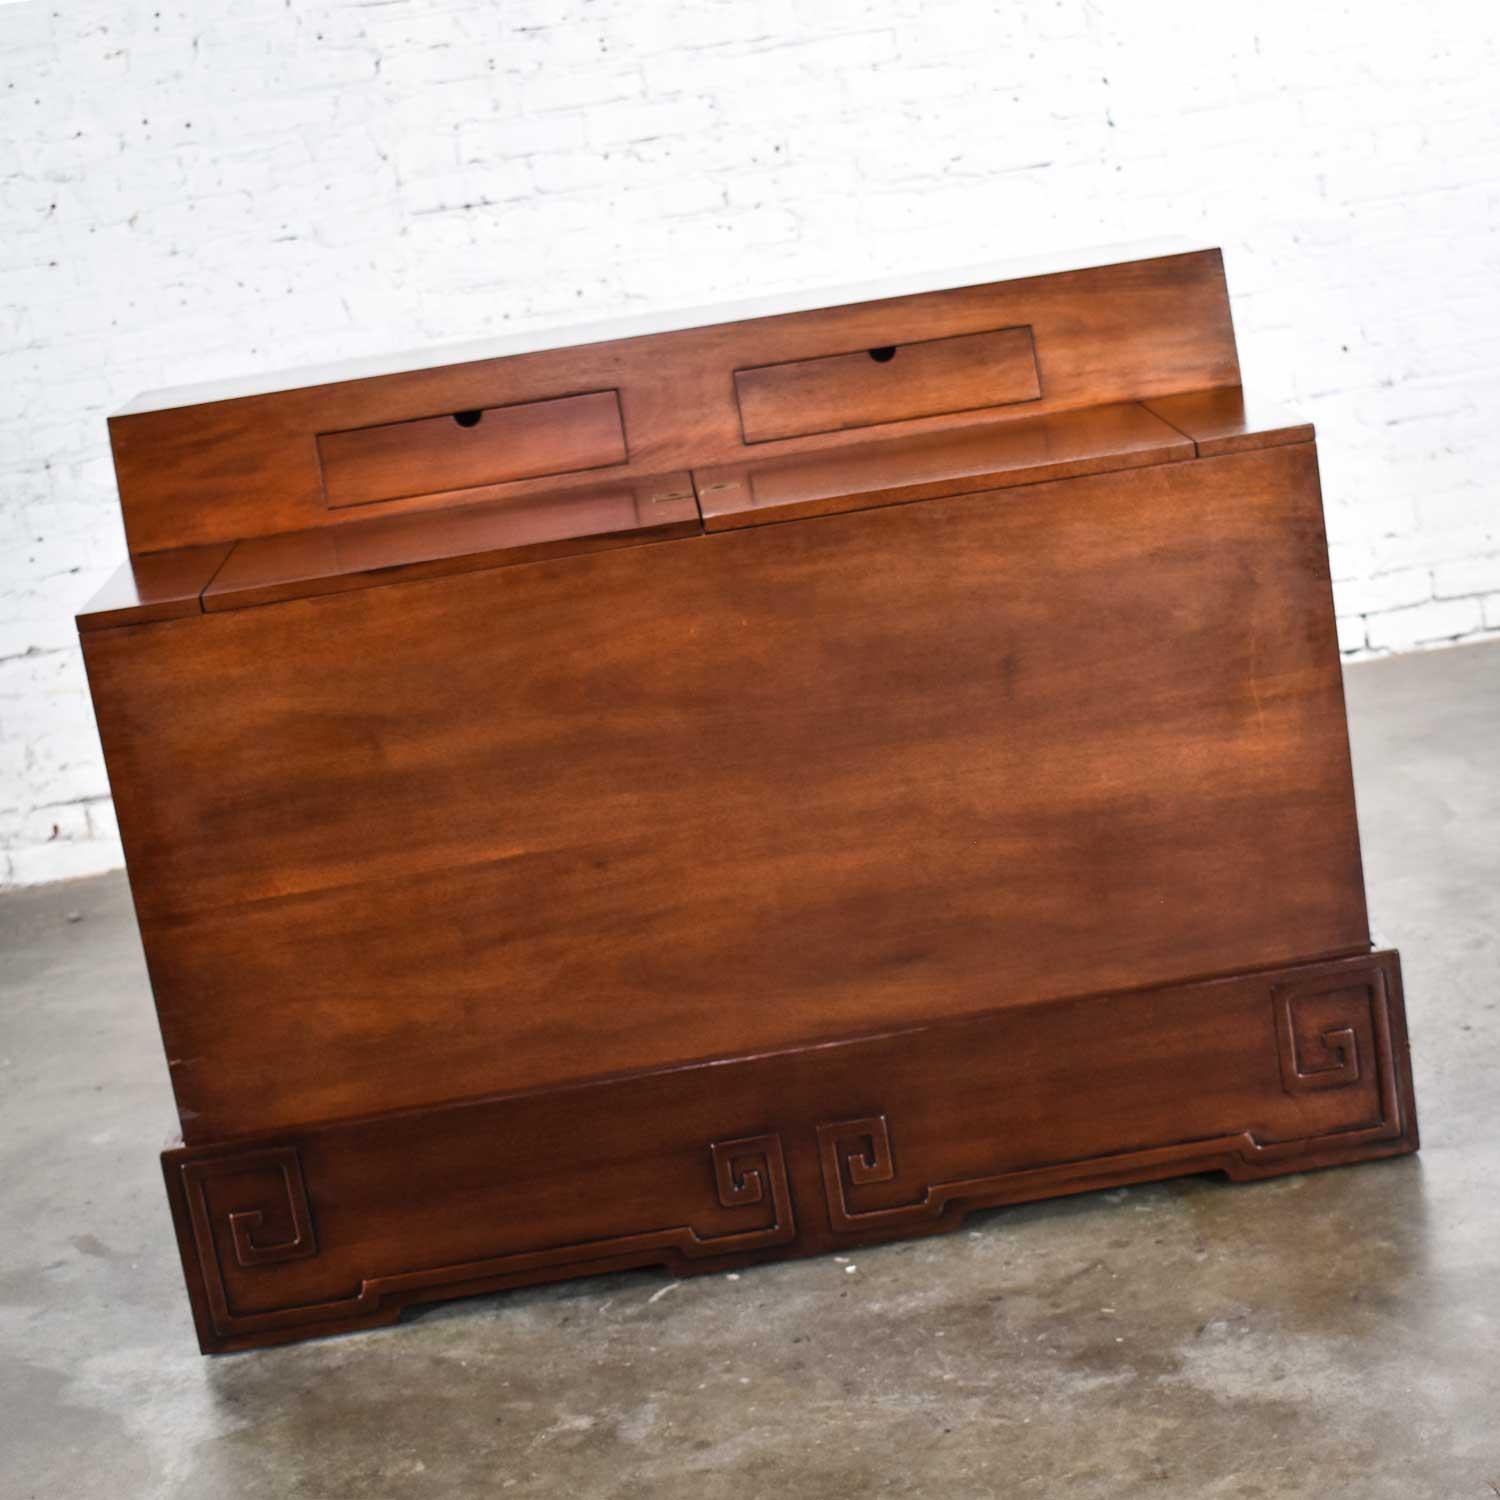 Colombian Art Deco Style Mahogany Entry Desk or Bar by IMA S.A. Bogota, Colombia For Sale